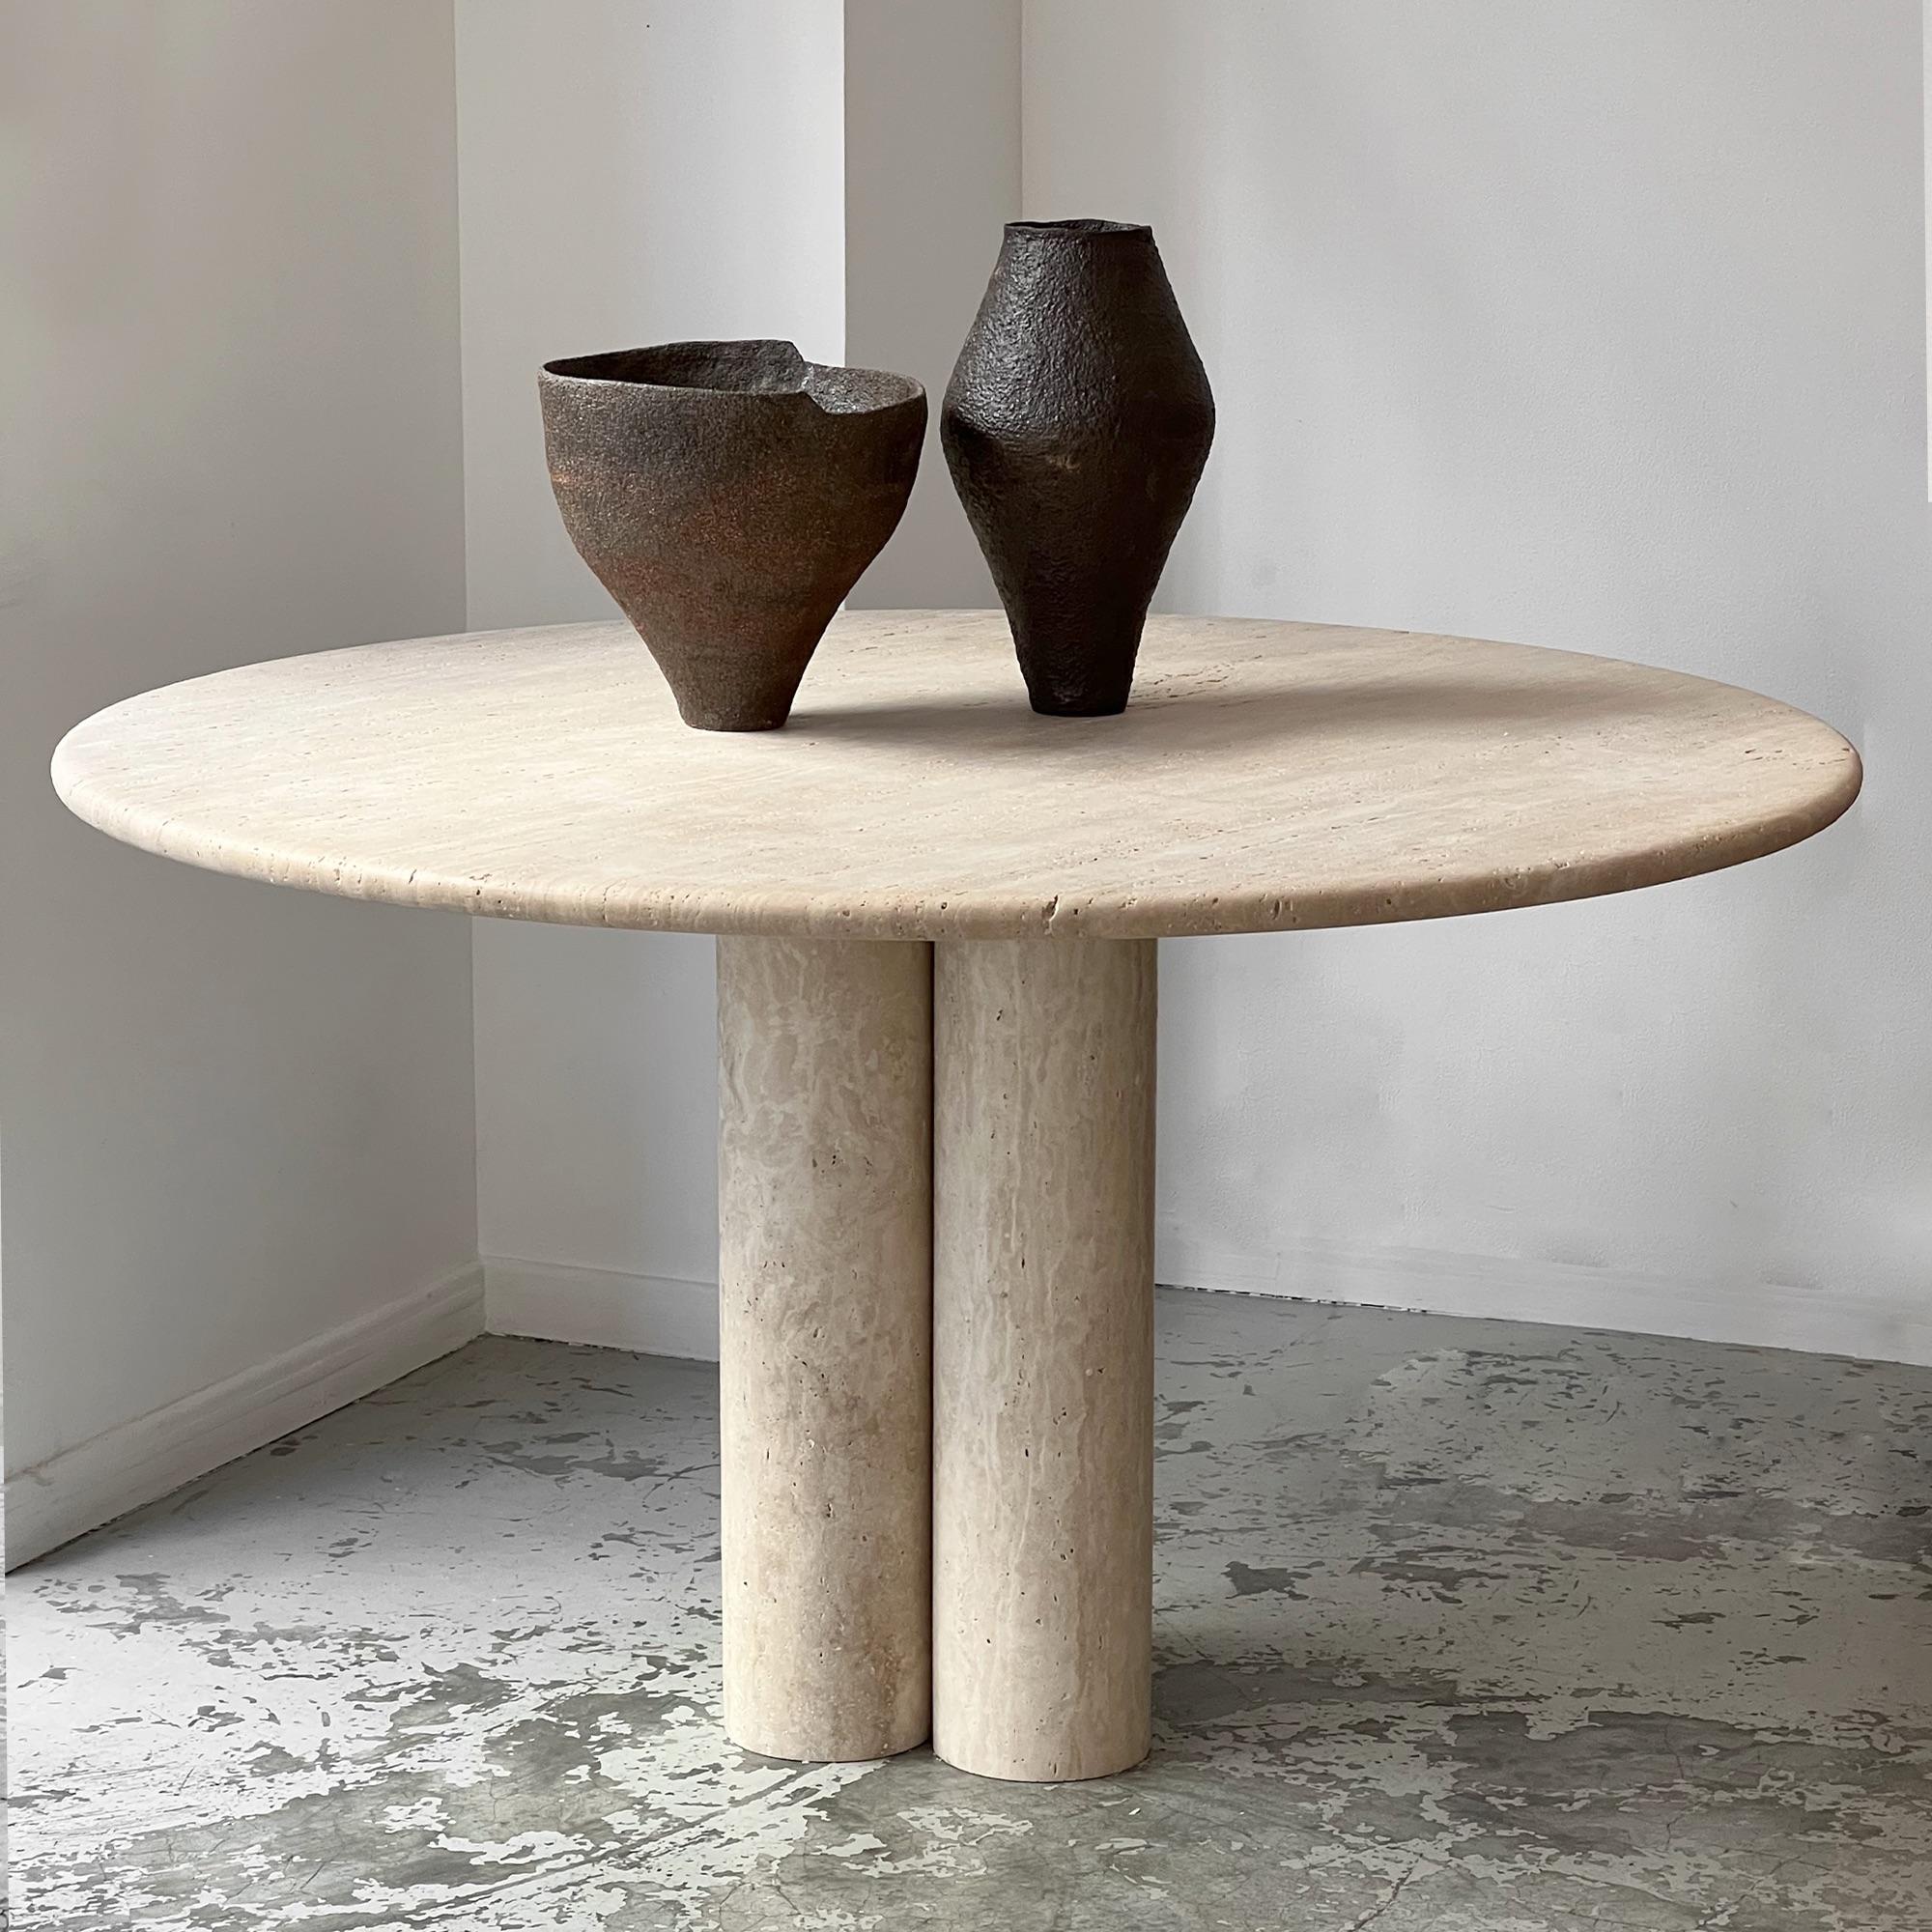 Untreated natural travertine table. The overall structure is in travertine. The top is circular and rests directly on three solid cylinders forming the base.
In very good condition.